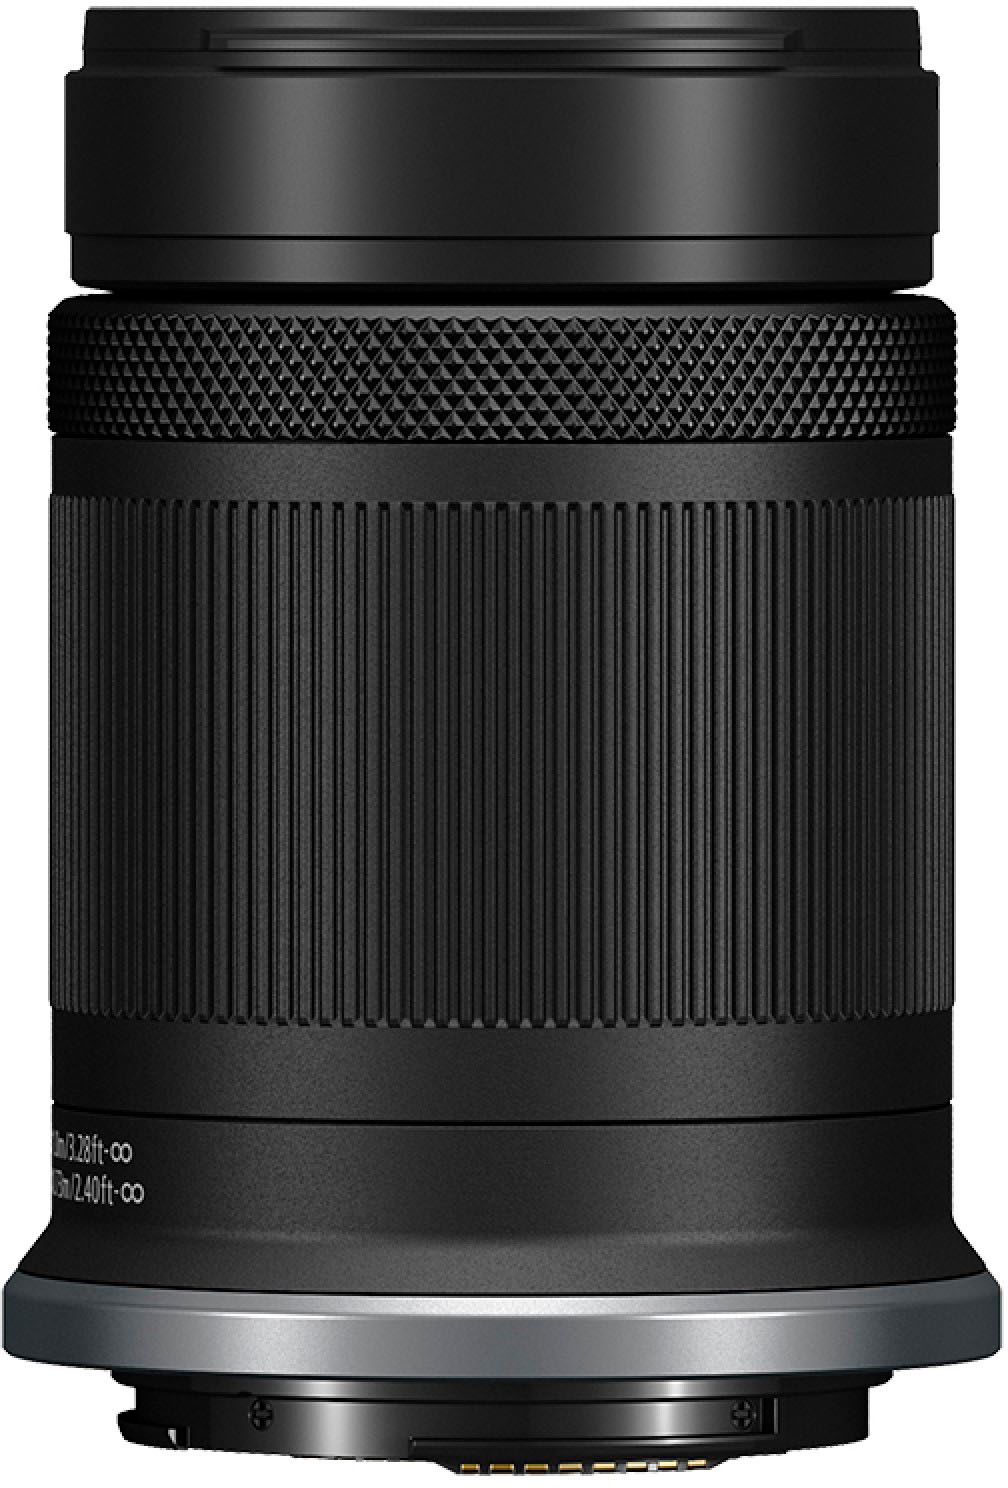 Angle View: Sigma - 60-600mm f/4.5-6.3 DG OS HSM Optical Telephoto Zoom Lens for Canon EF - Black